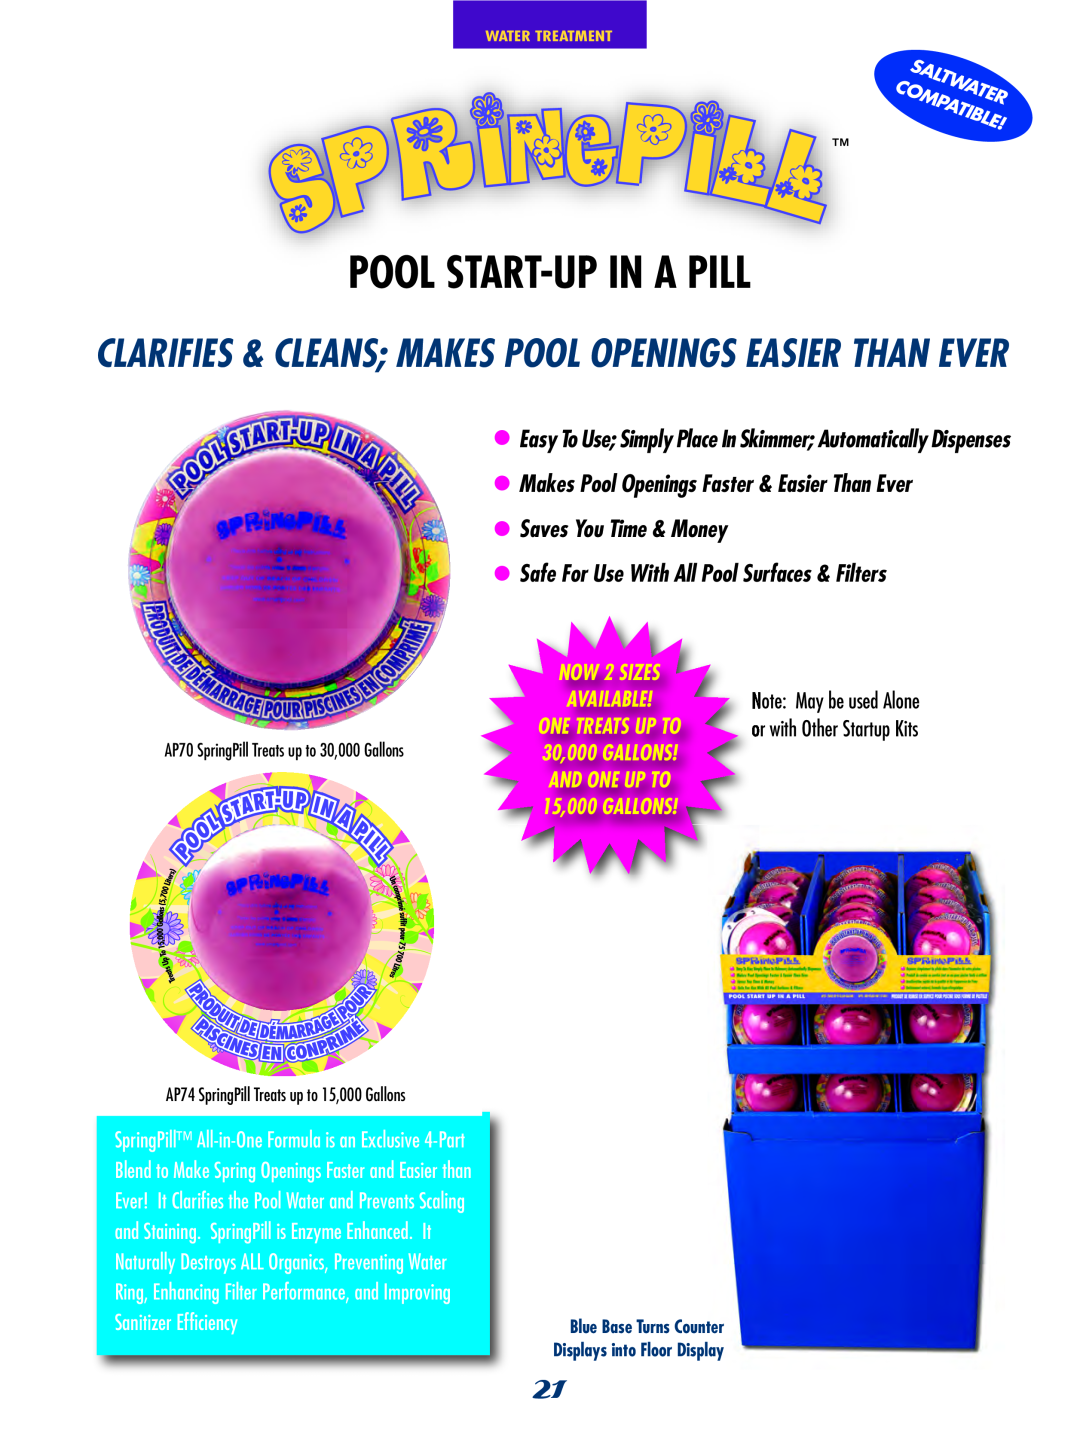 SmartPool Inc NC31 Pool Start-Upin A Pill, Makes Pool Openings Faster & Easier Than Ever, •Saves You Time & Money, Compati 